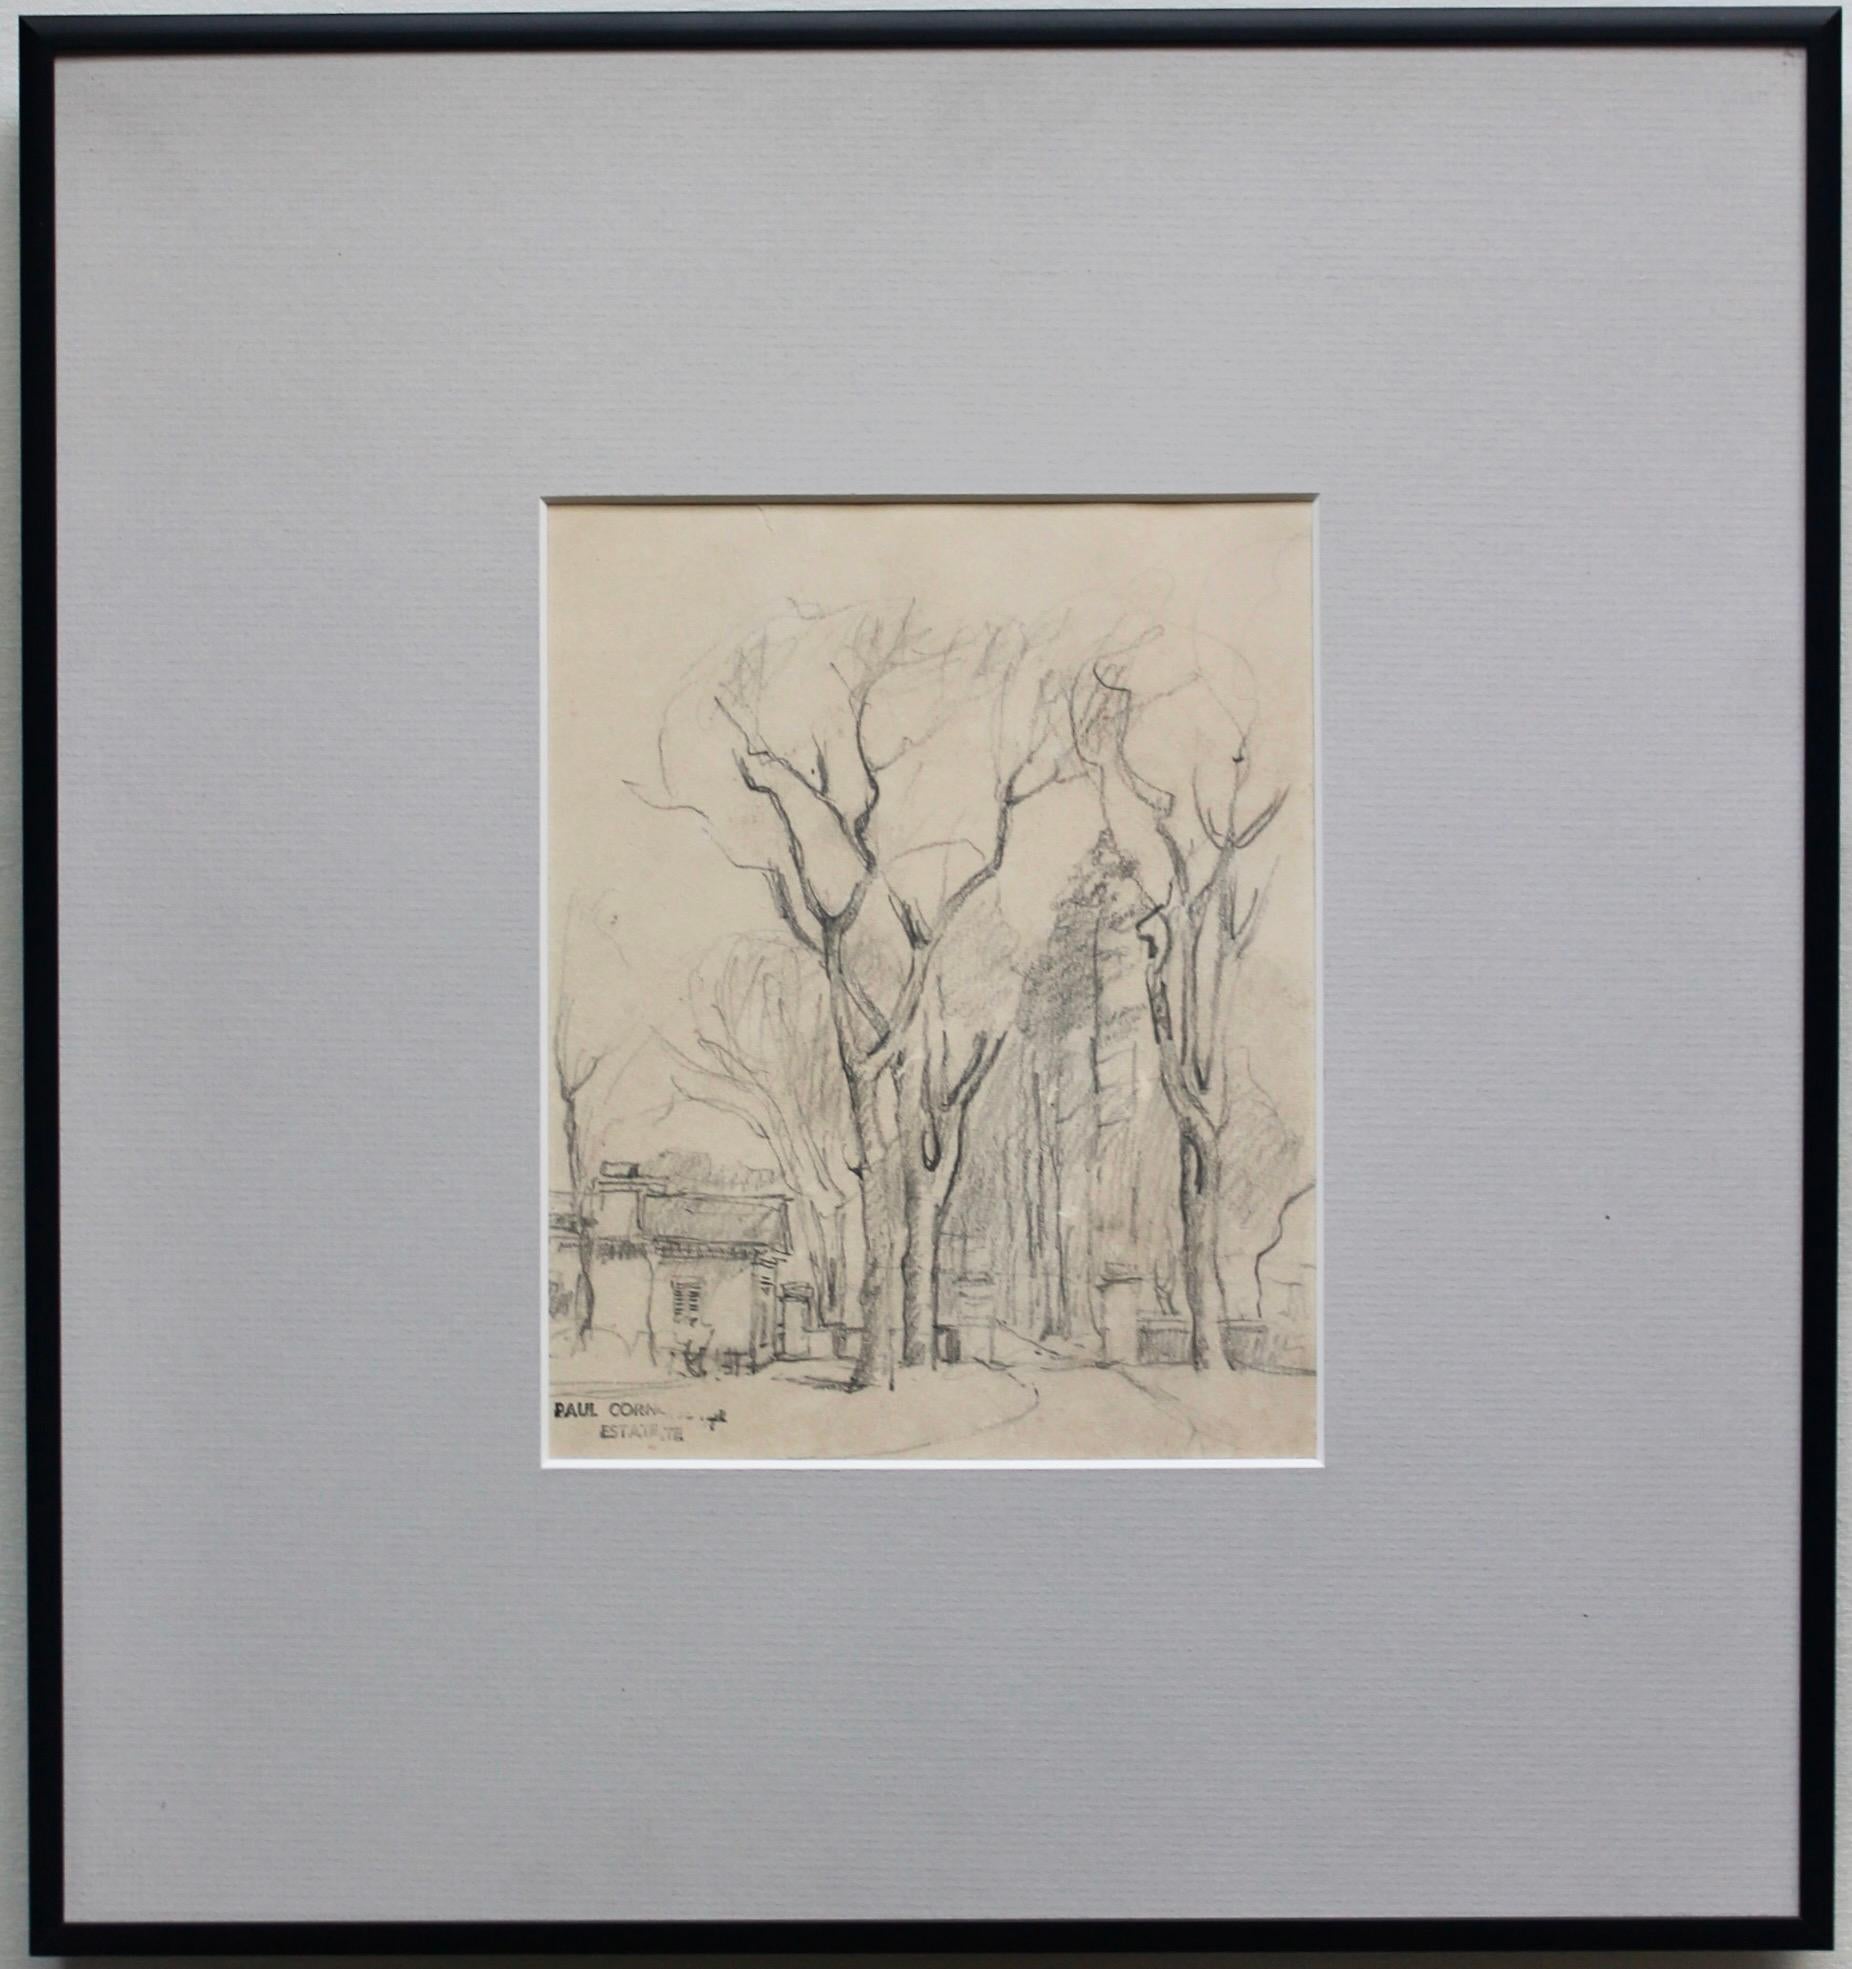 These Paul Cornoyer pencil sketches all bear labels from the David Findlay Jr.
Gallery and were exhibited in the 1973 Cornoyer Retrospective at The Lakeview Center for The Arts & Sciences in Peoria Illinois. The exhibit drew heavily from the